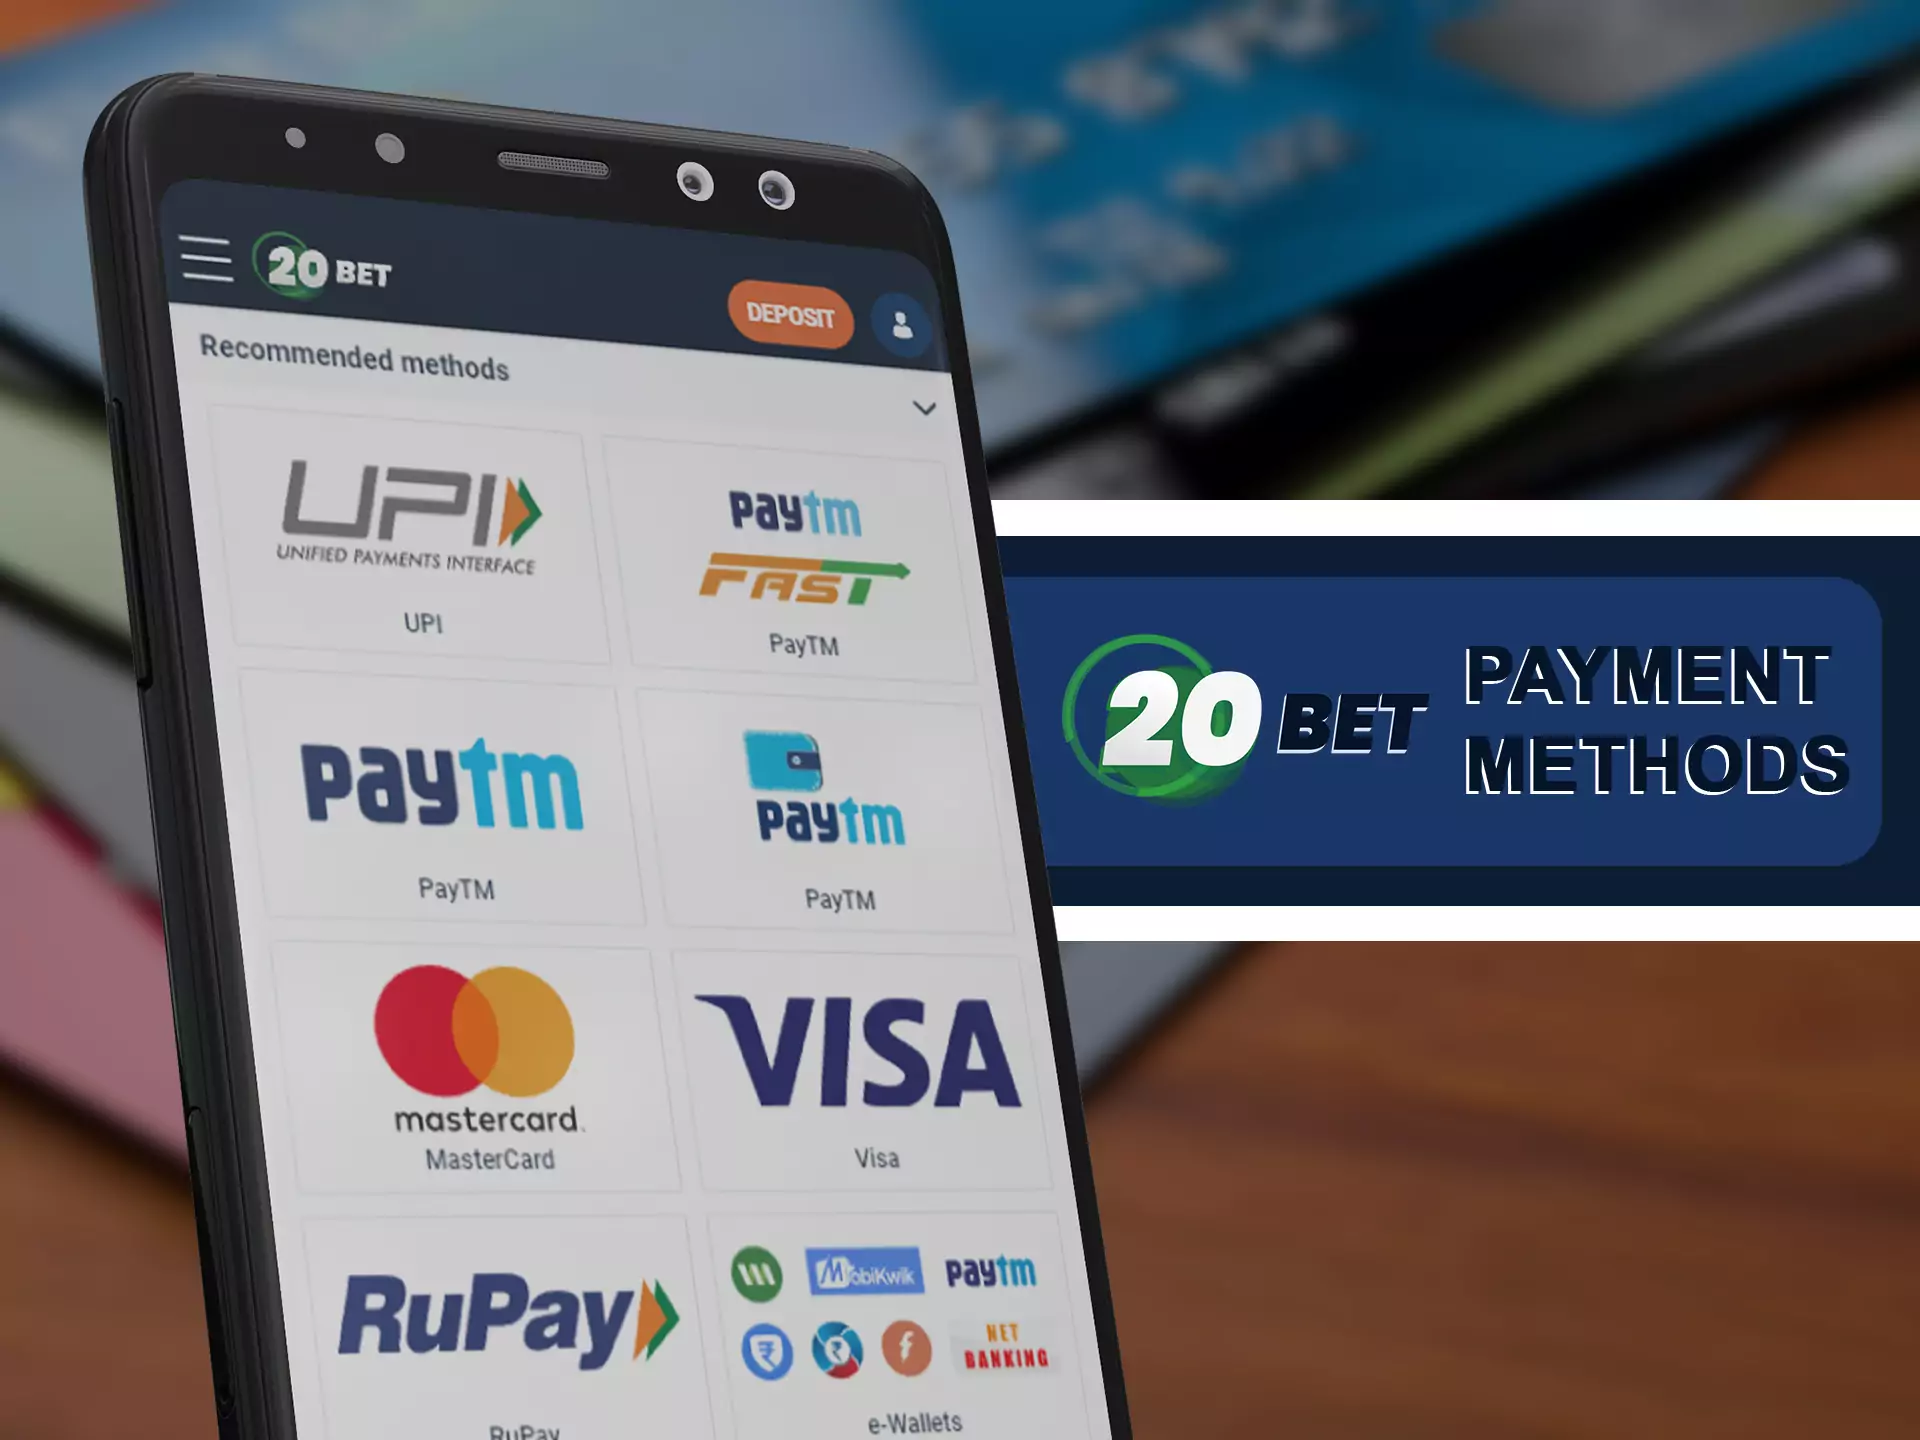 Choose your prefered payment method in 20bet app.